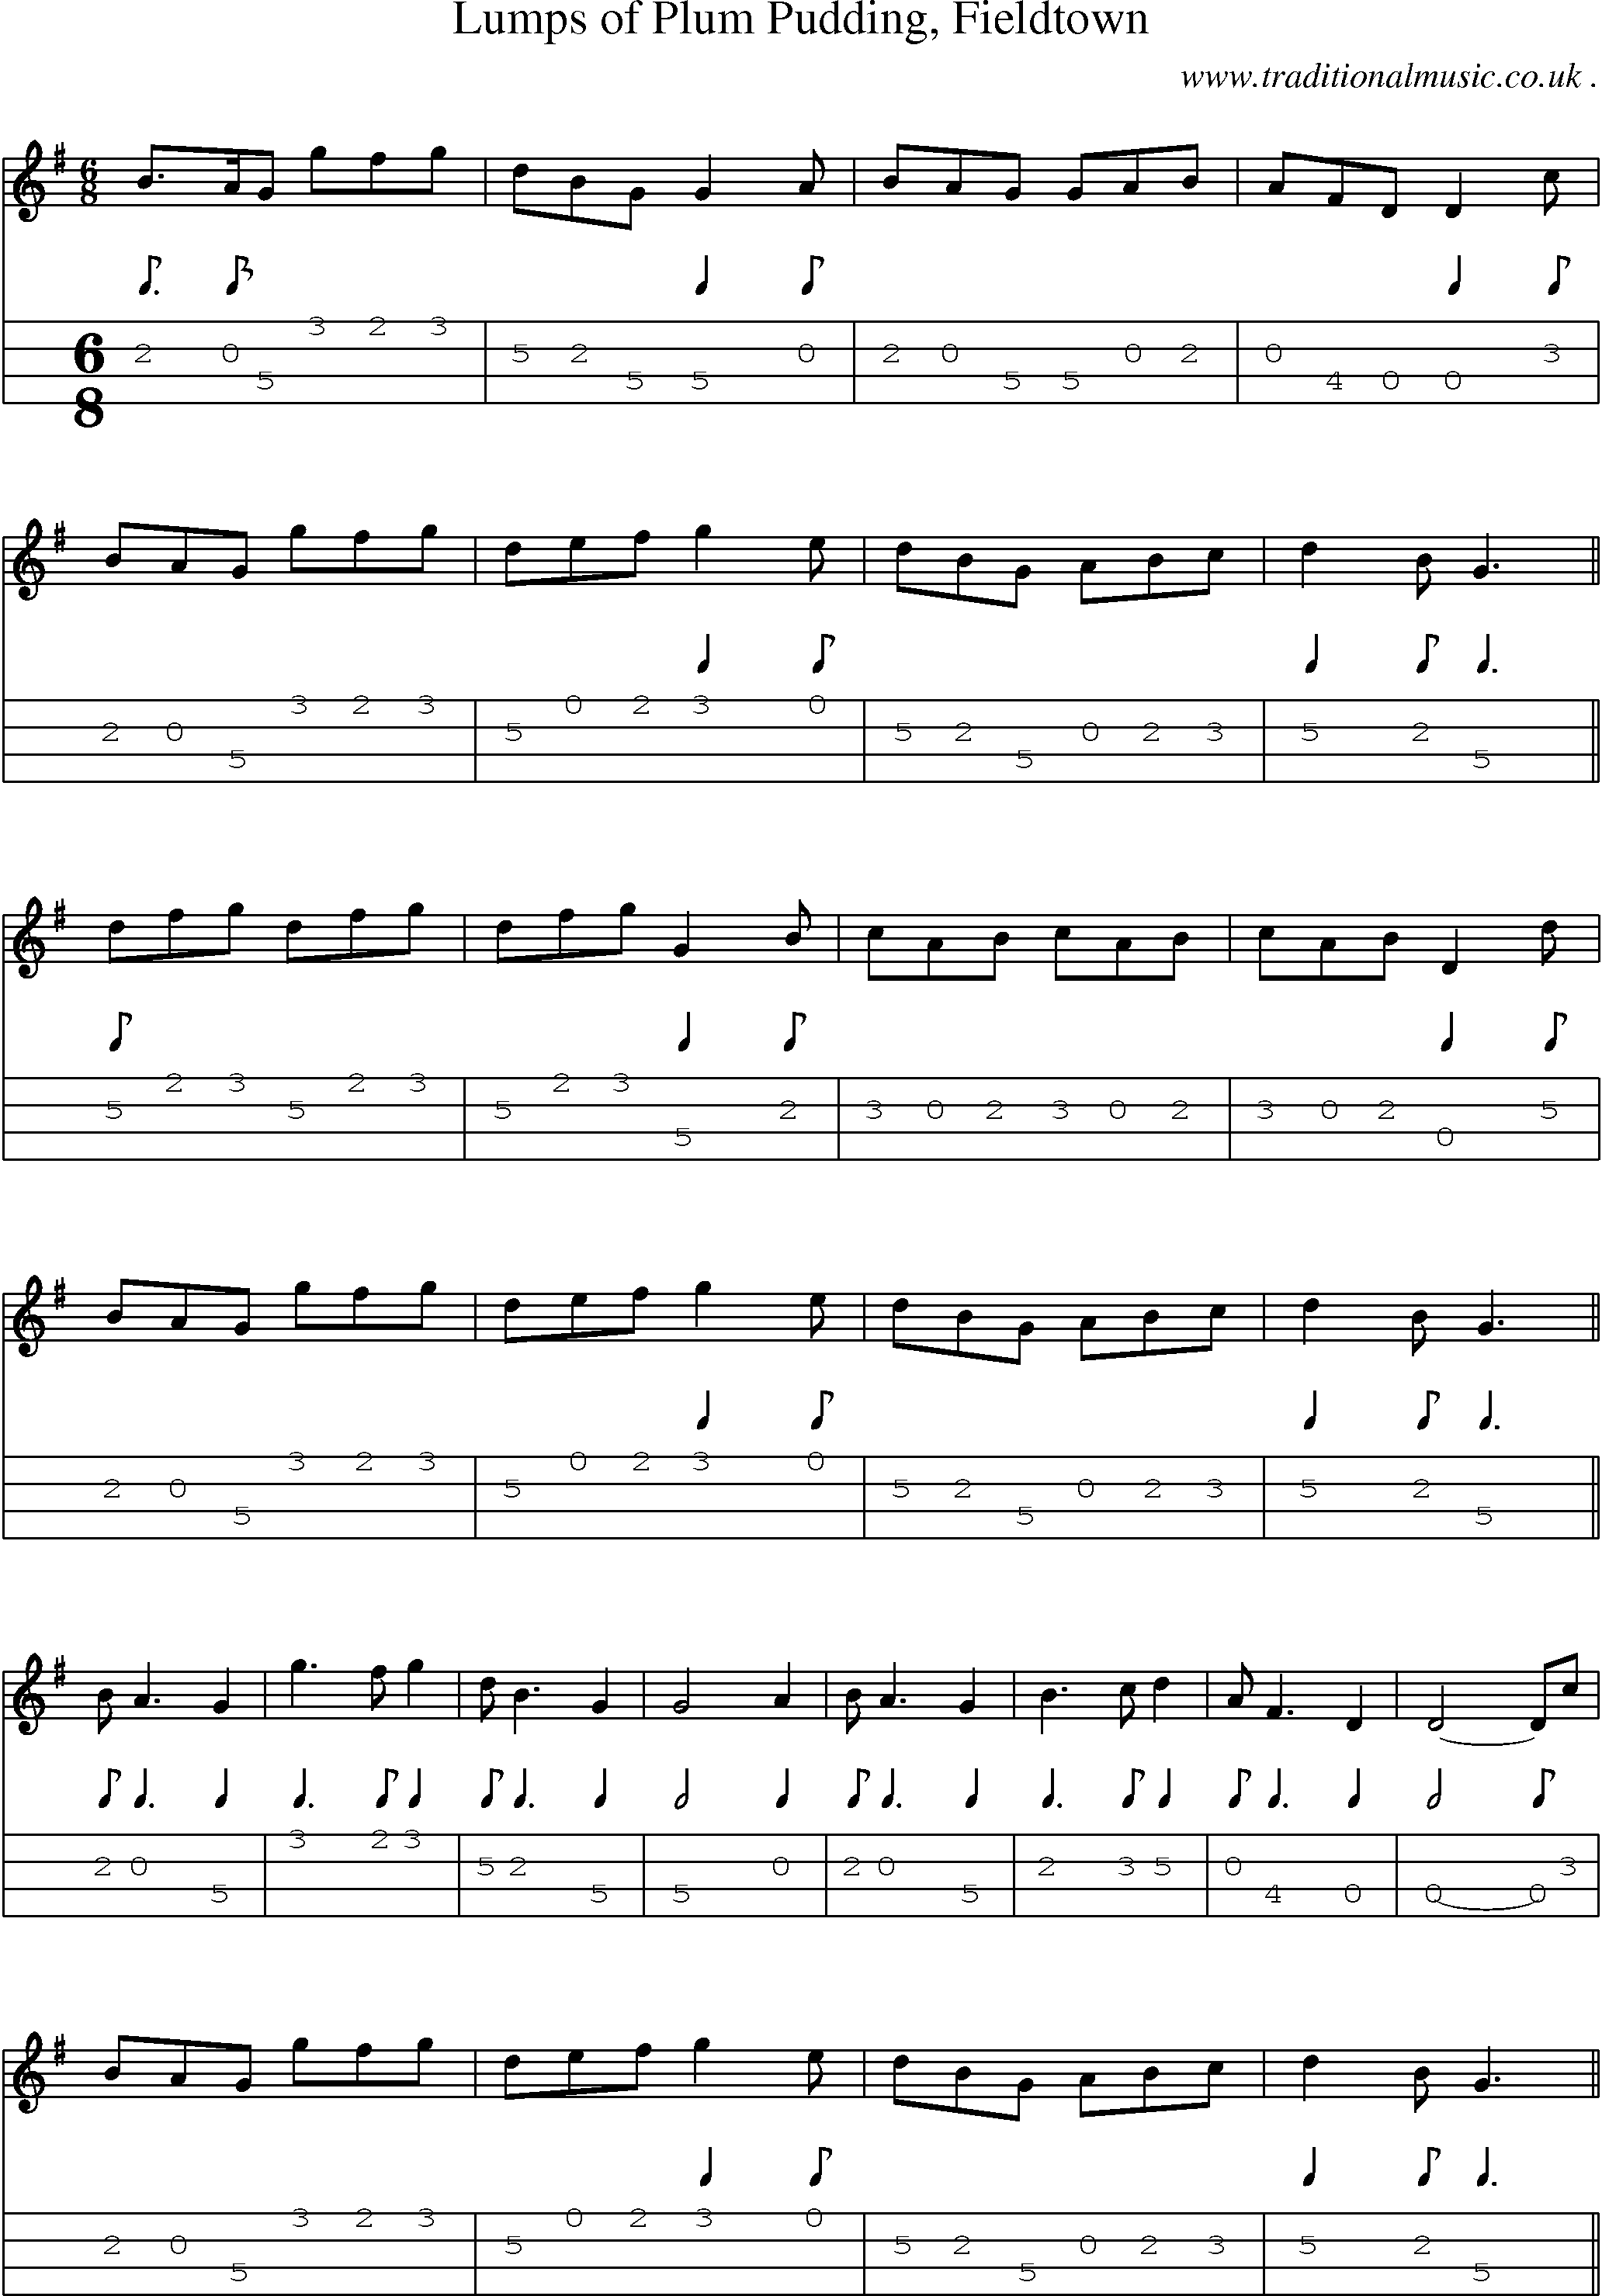 Sheet-Music and Mandolin Tabs for Lumps Of Plum Pudding Fieldtown